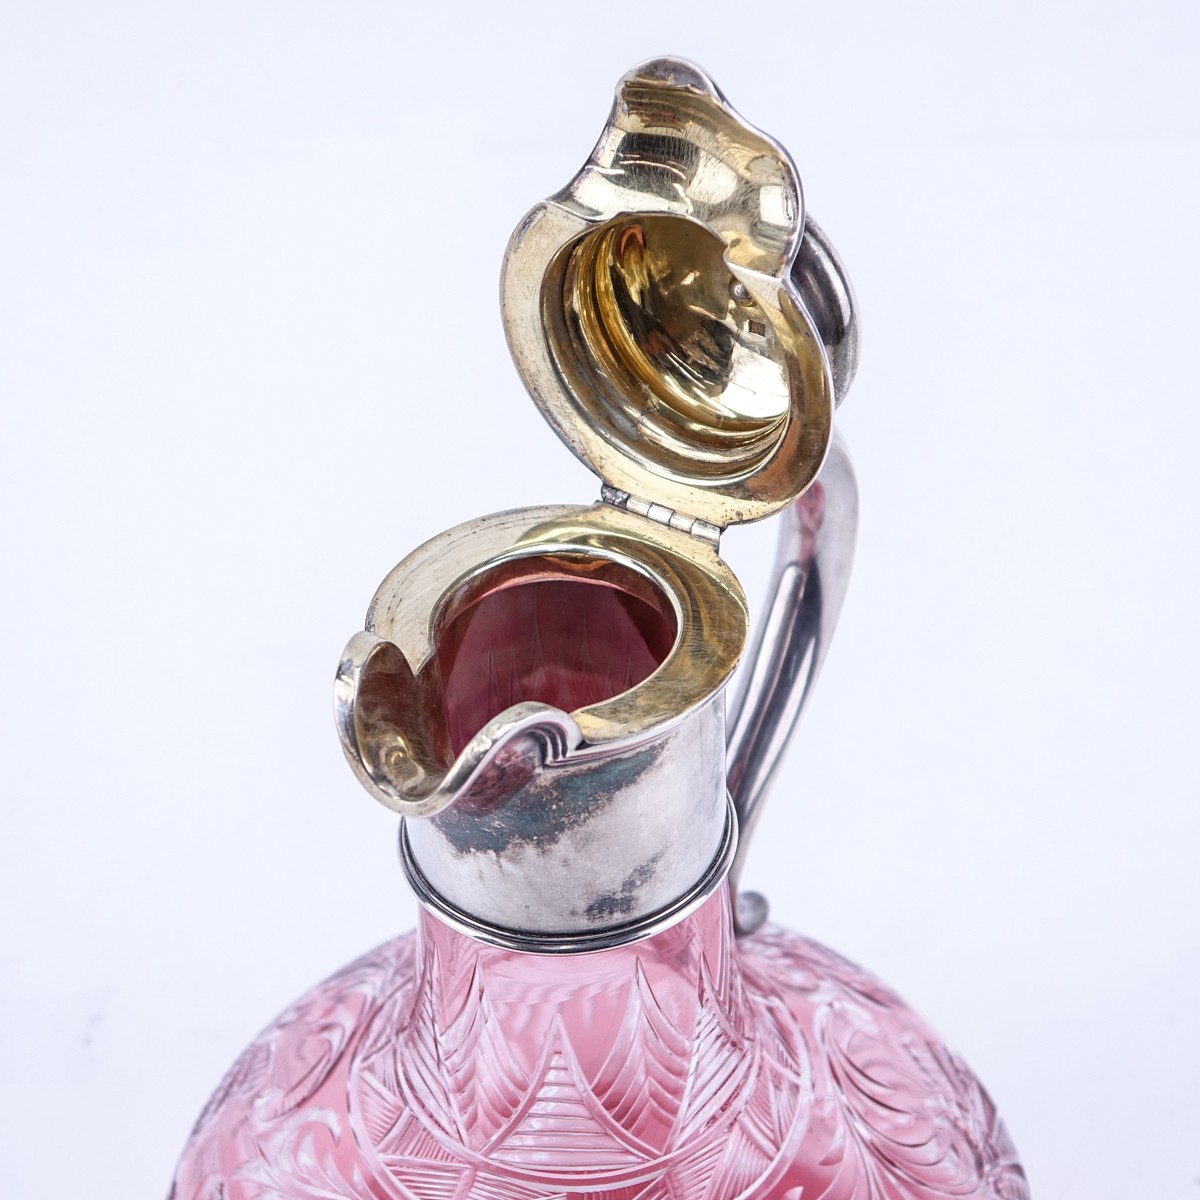 Faberge Moscow 1896 Silver and Cut Ruby to Clear Glass Decanter with Relief Flower Finial. Stamped ?.???????, 88 (Moscow city mark).